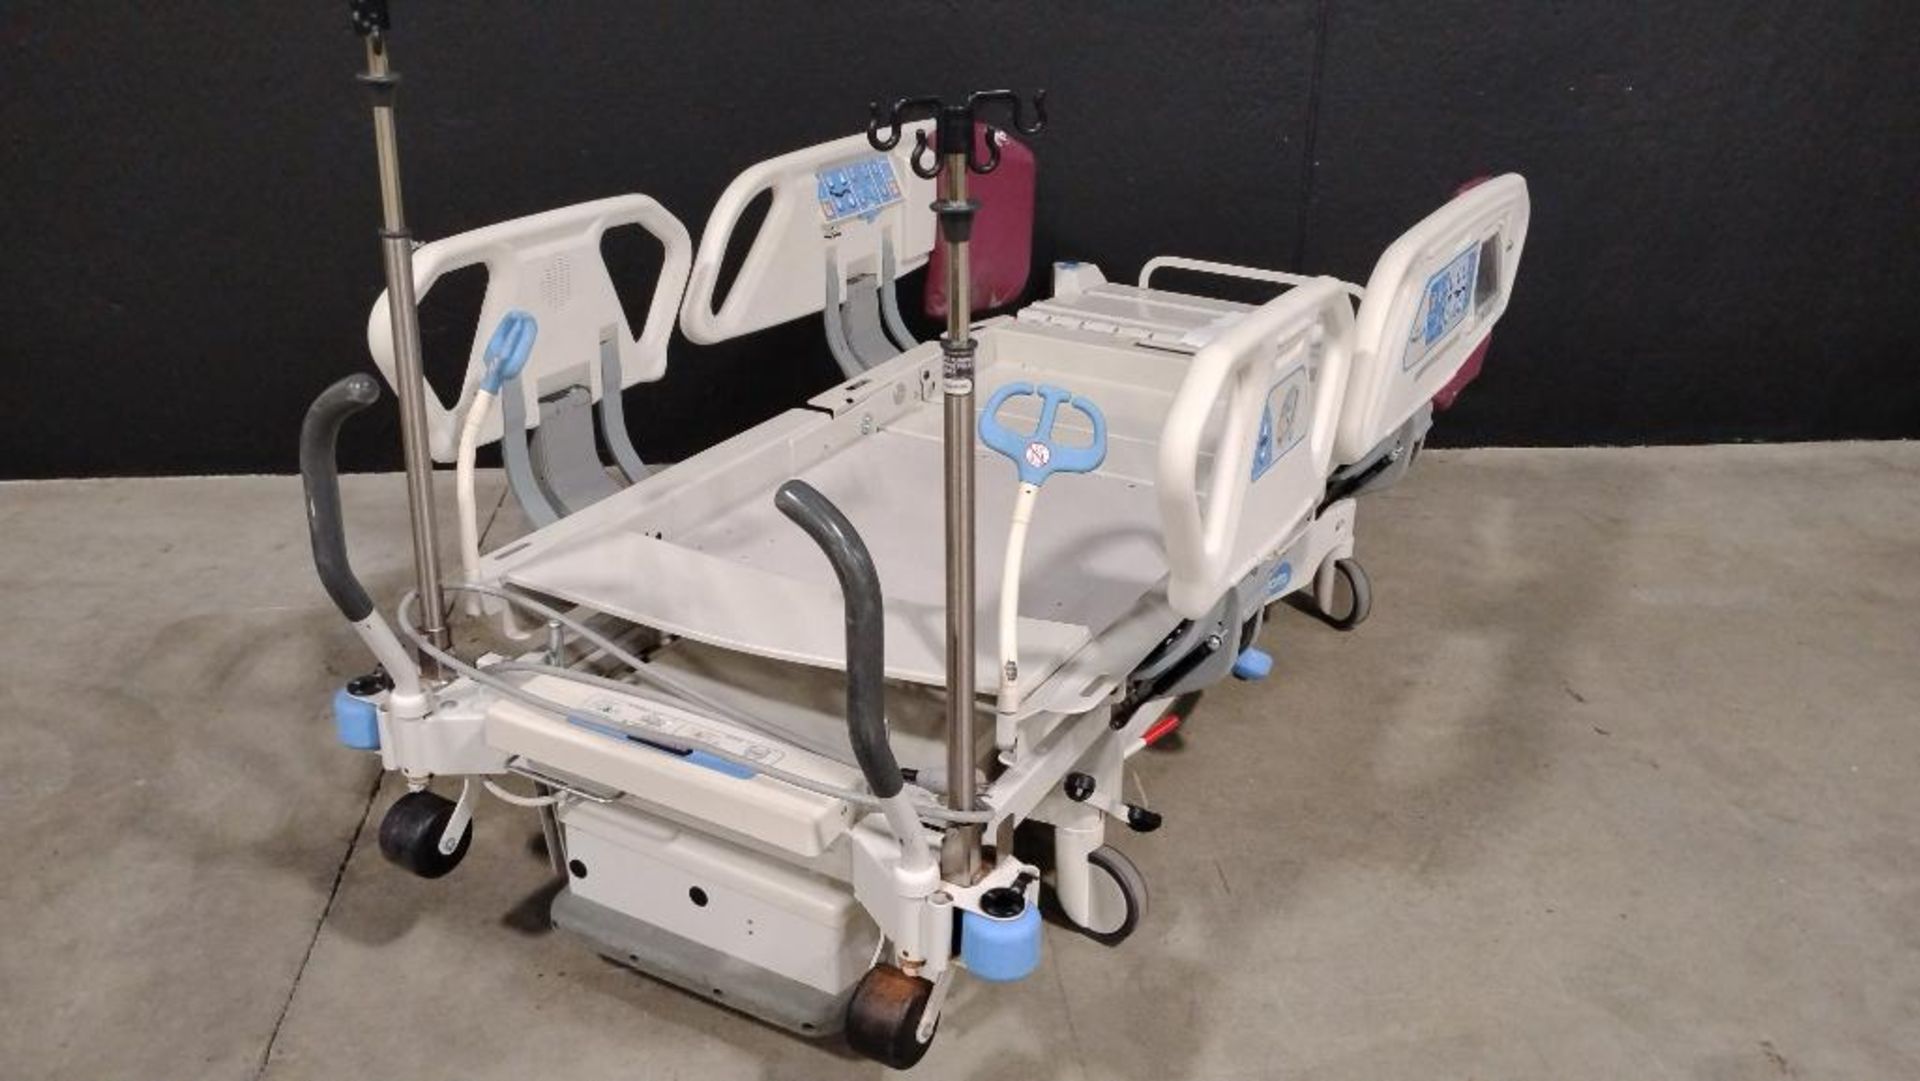 HILL-ROM TOTAL CARE SPORT 2 P1900 HOSPITAL BED - Image 3 of 3